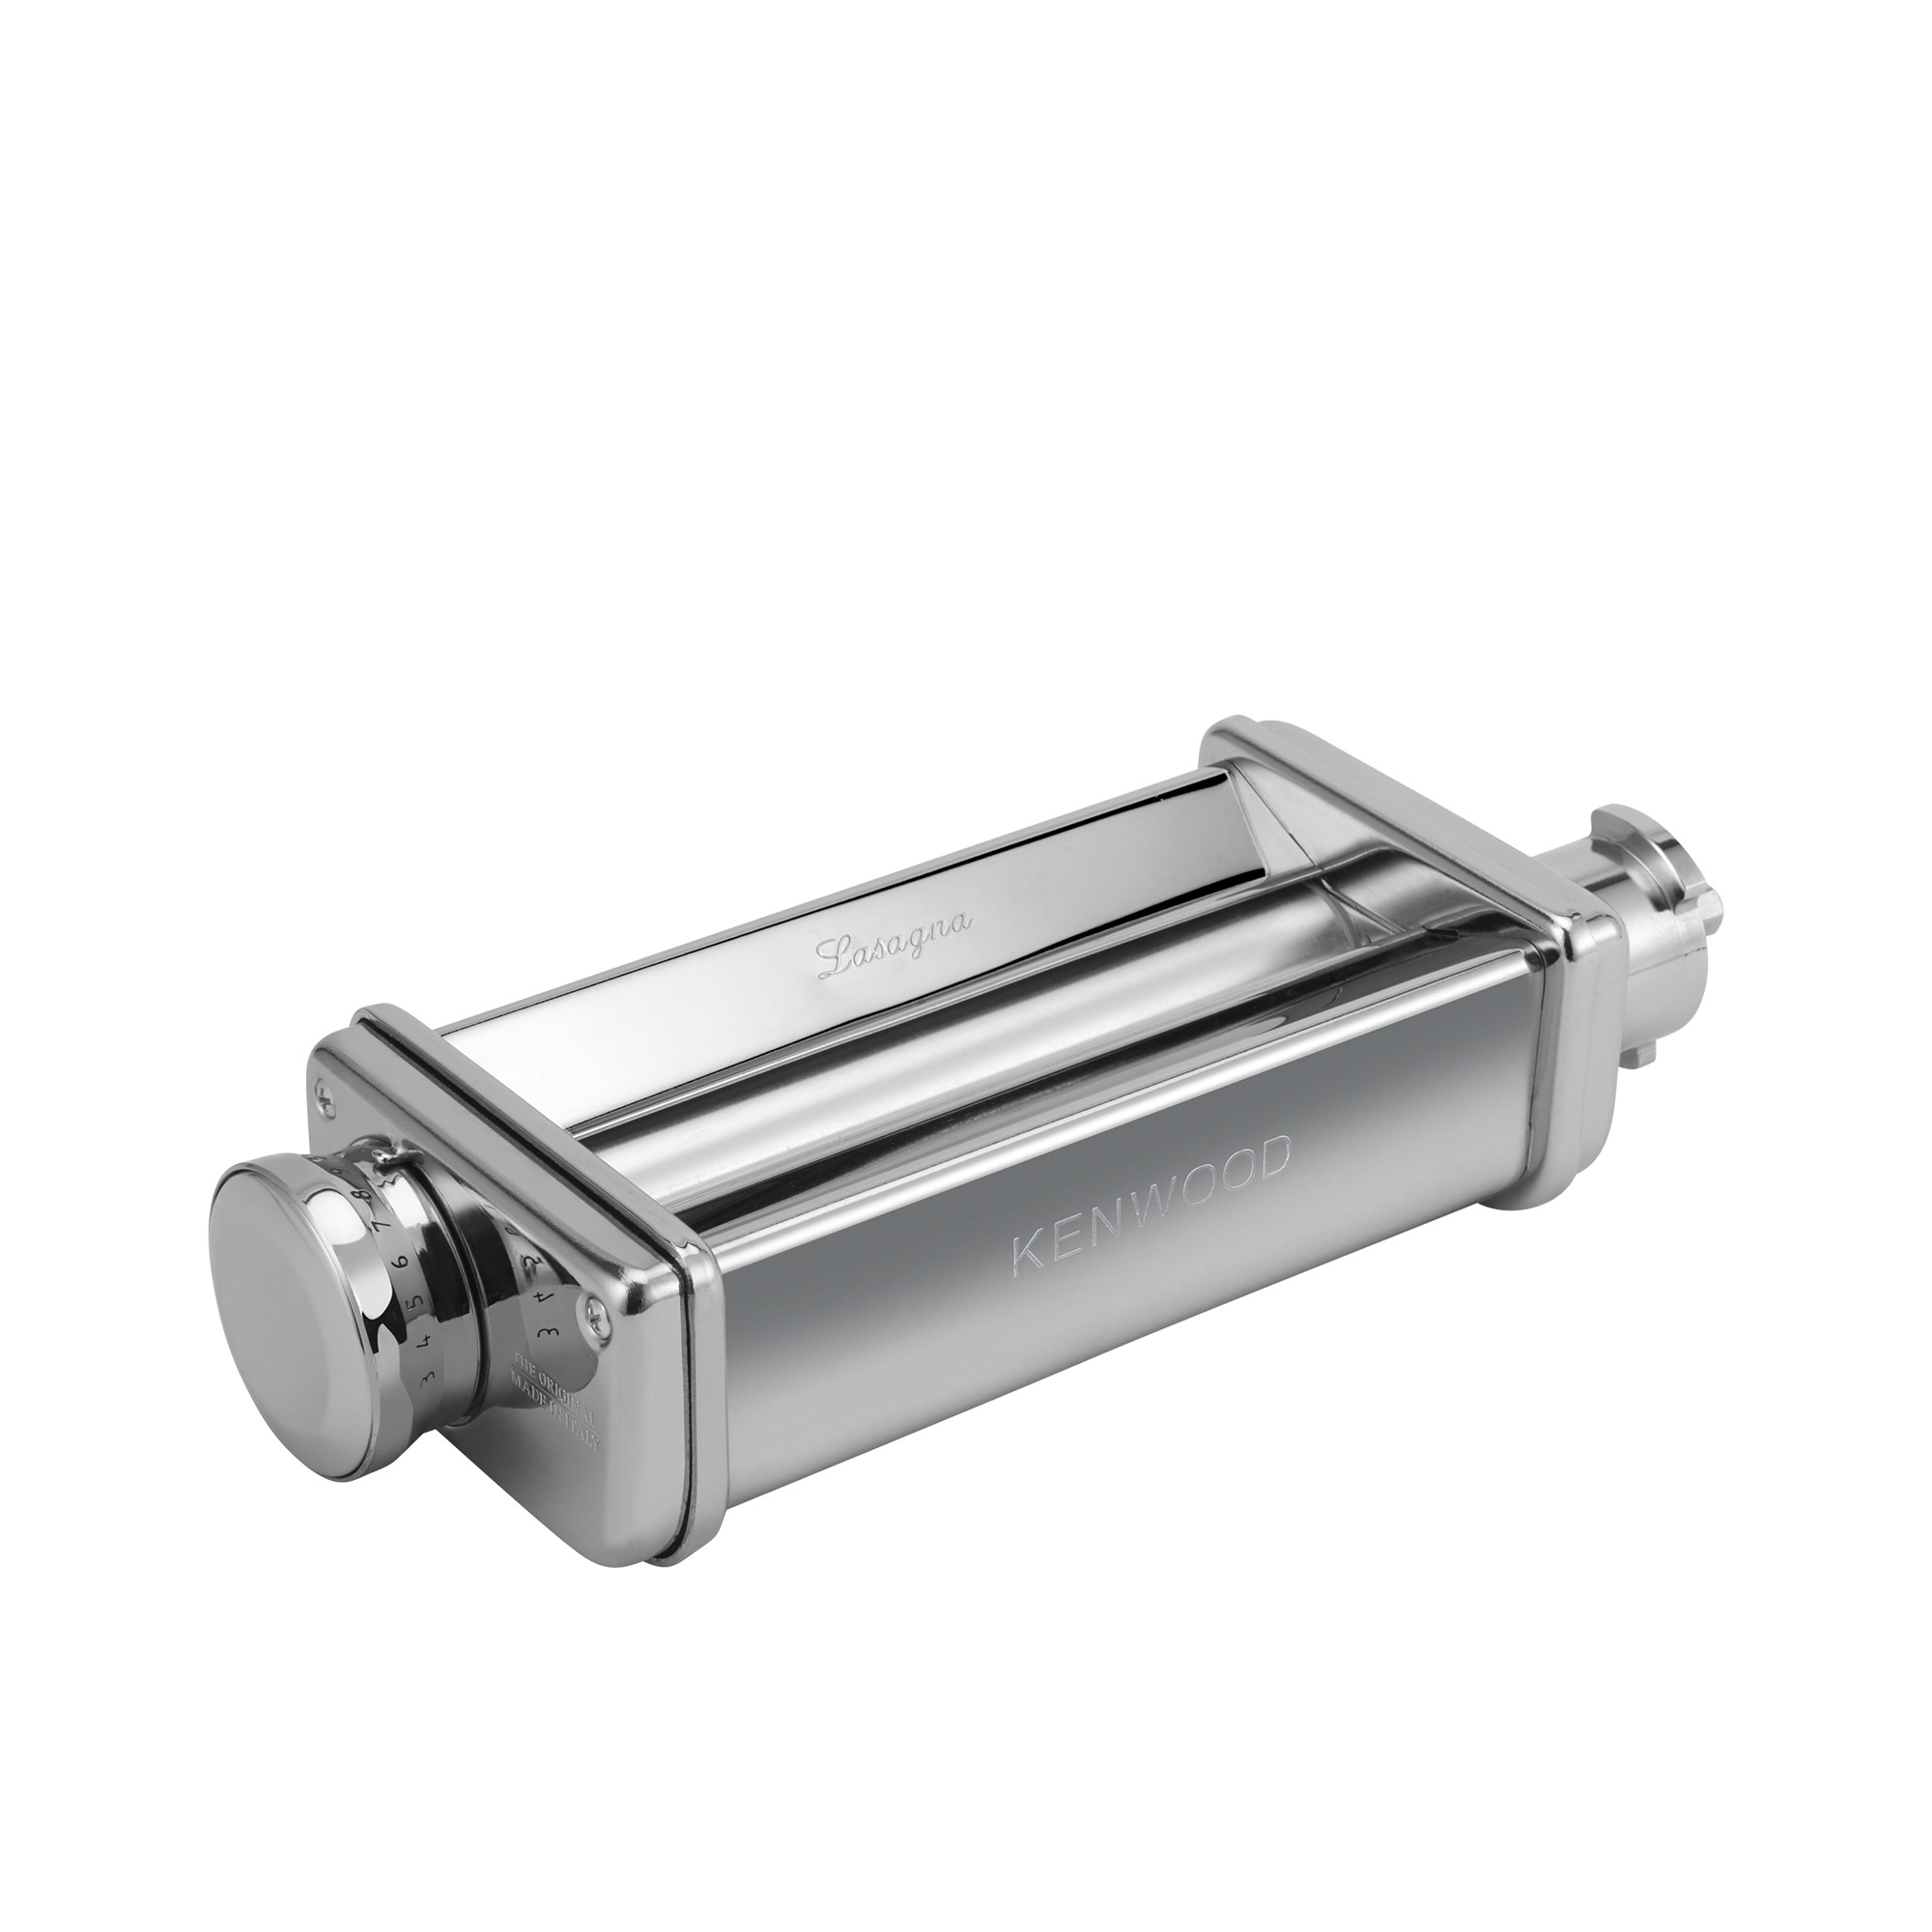 Kenwood Chef Lasagne Roller Attachment Image 1